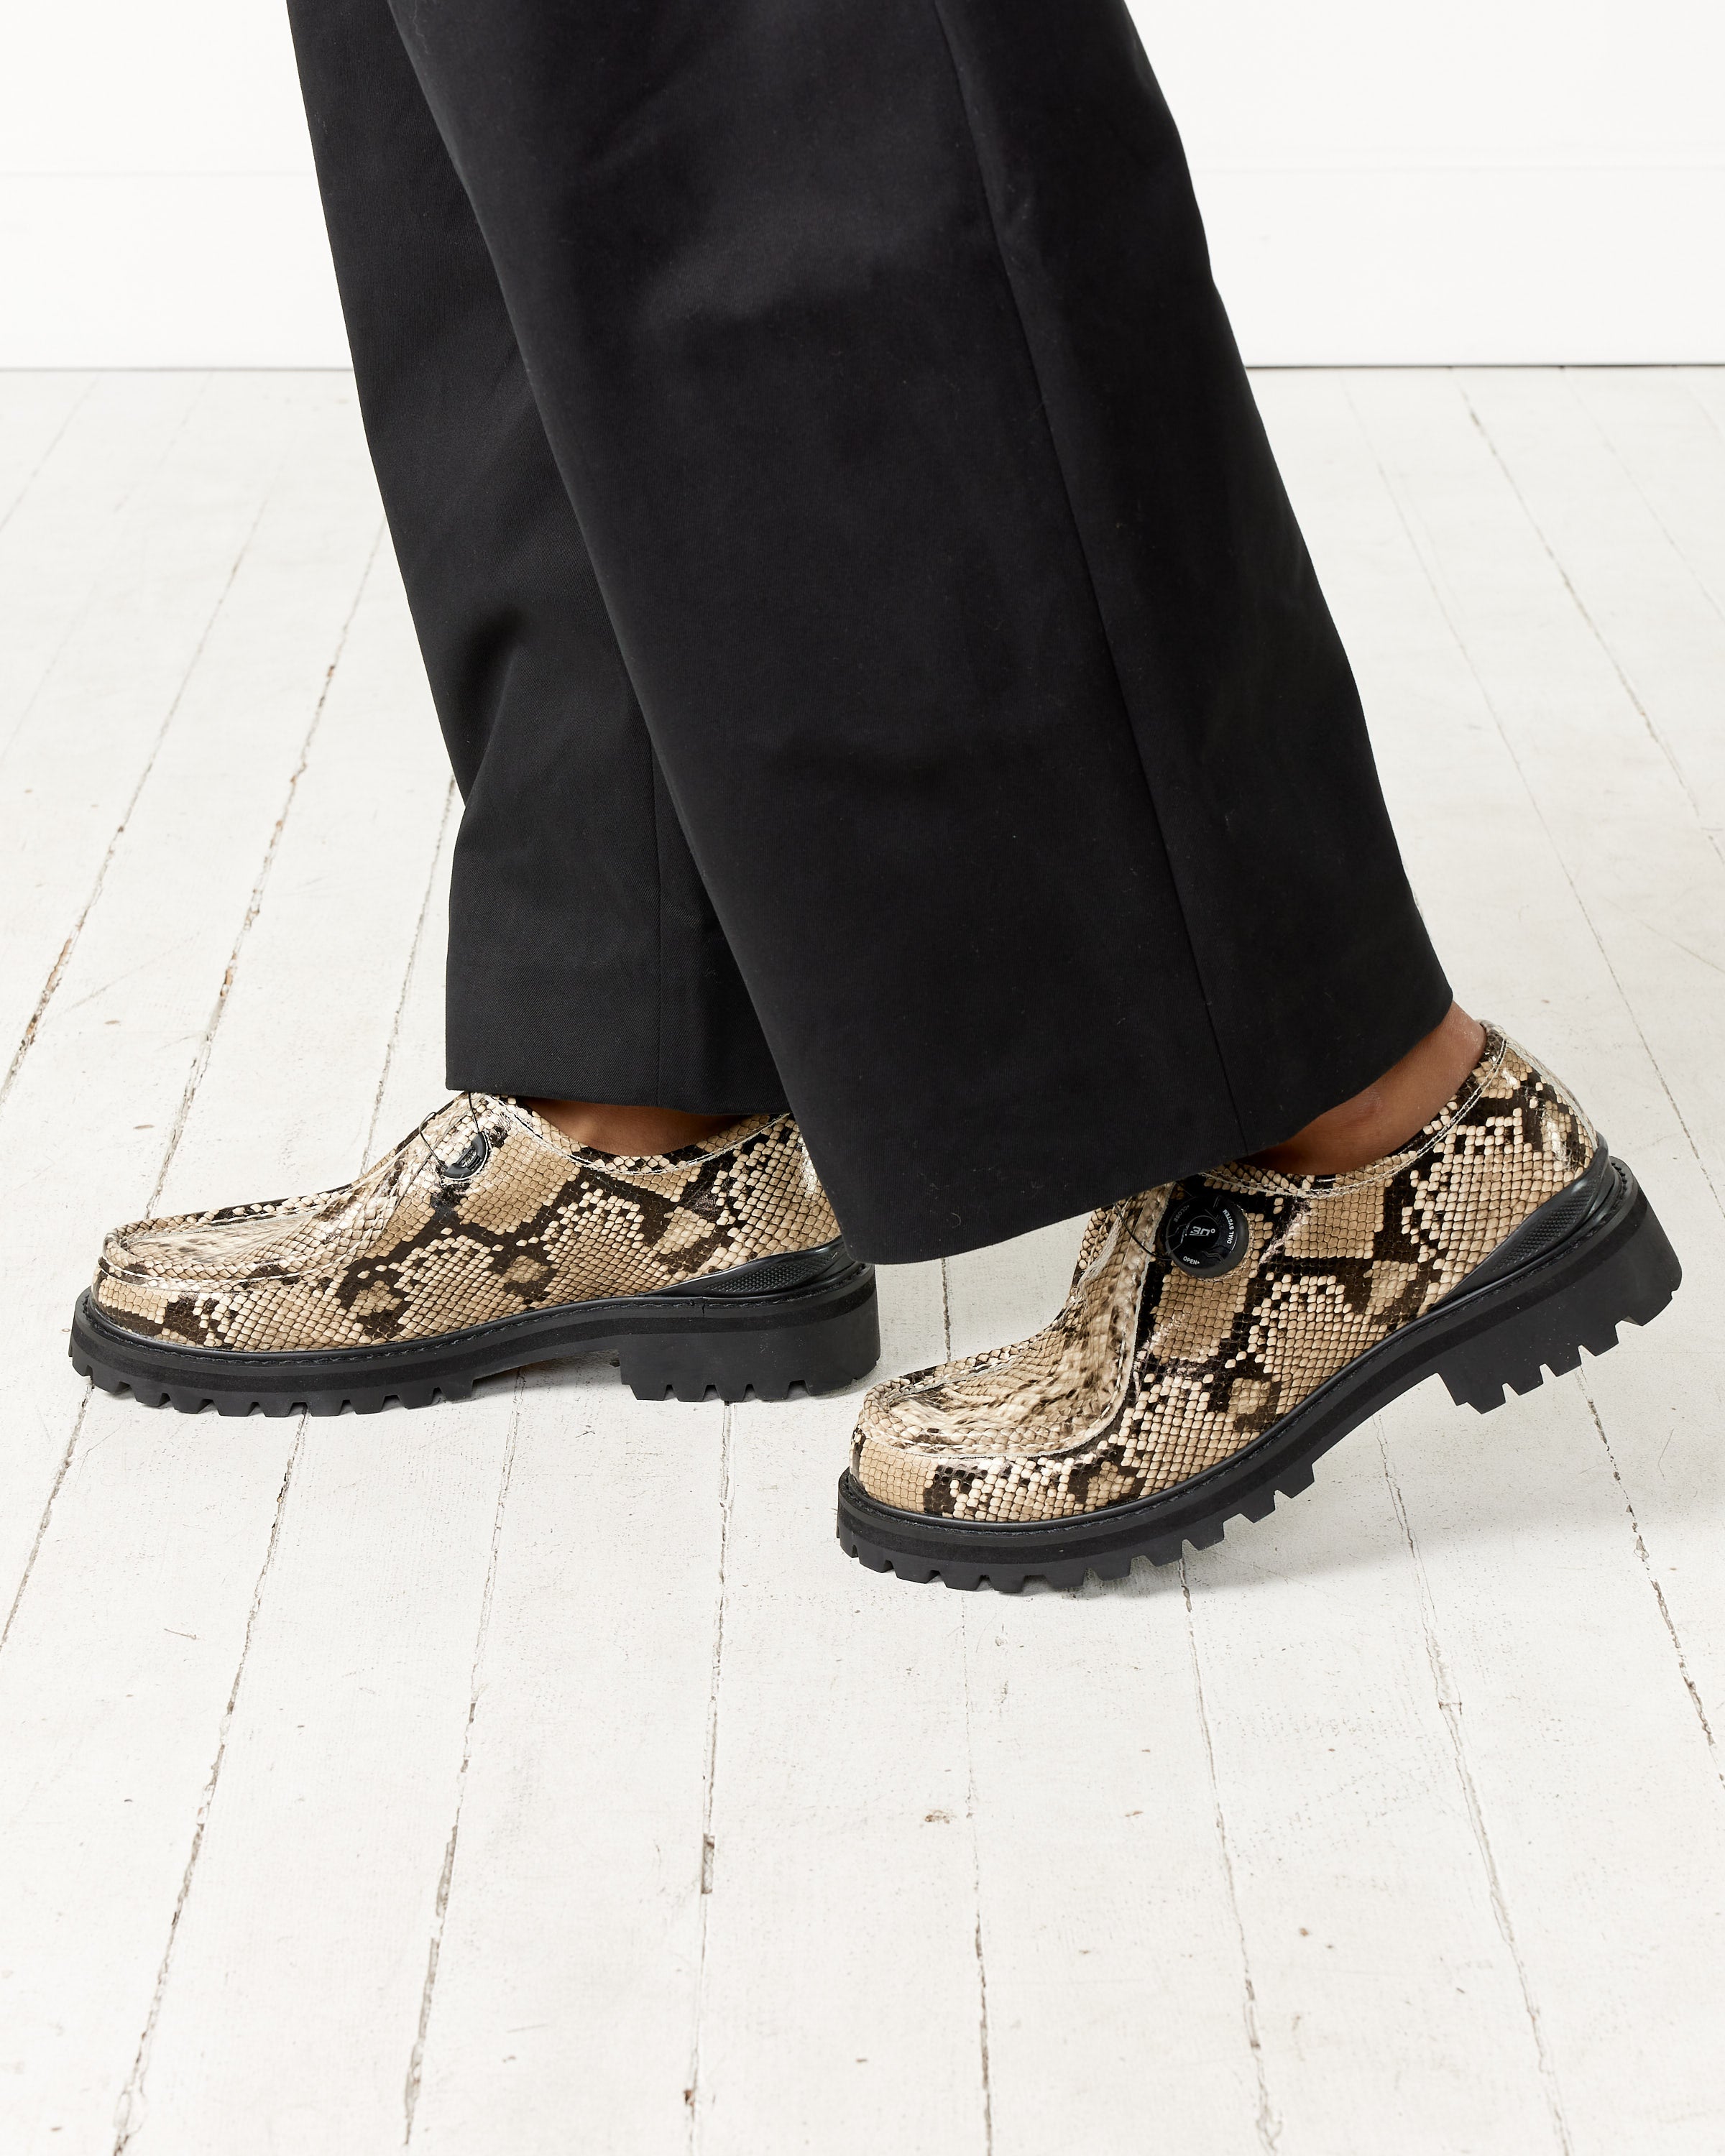 Chaussure de Marche in Snake